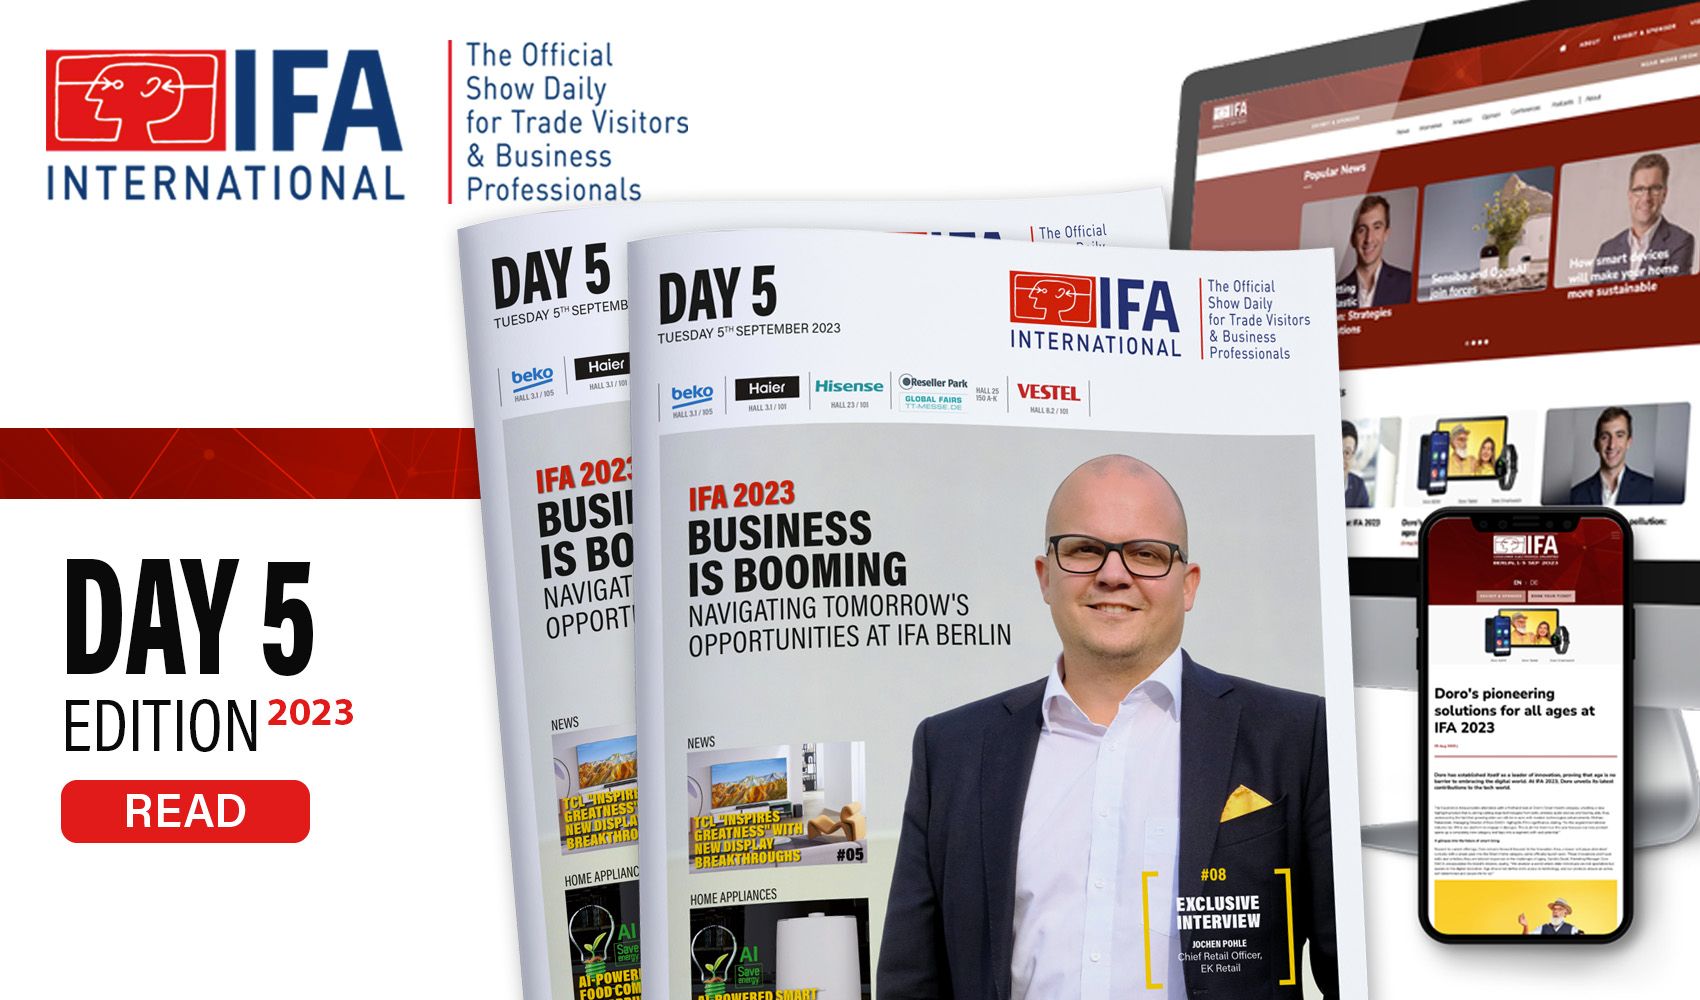 DISCOVER THE DAY 5 EDITION OF IFA INTERNATIONAL!